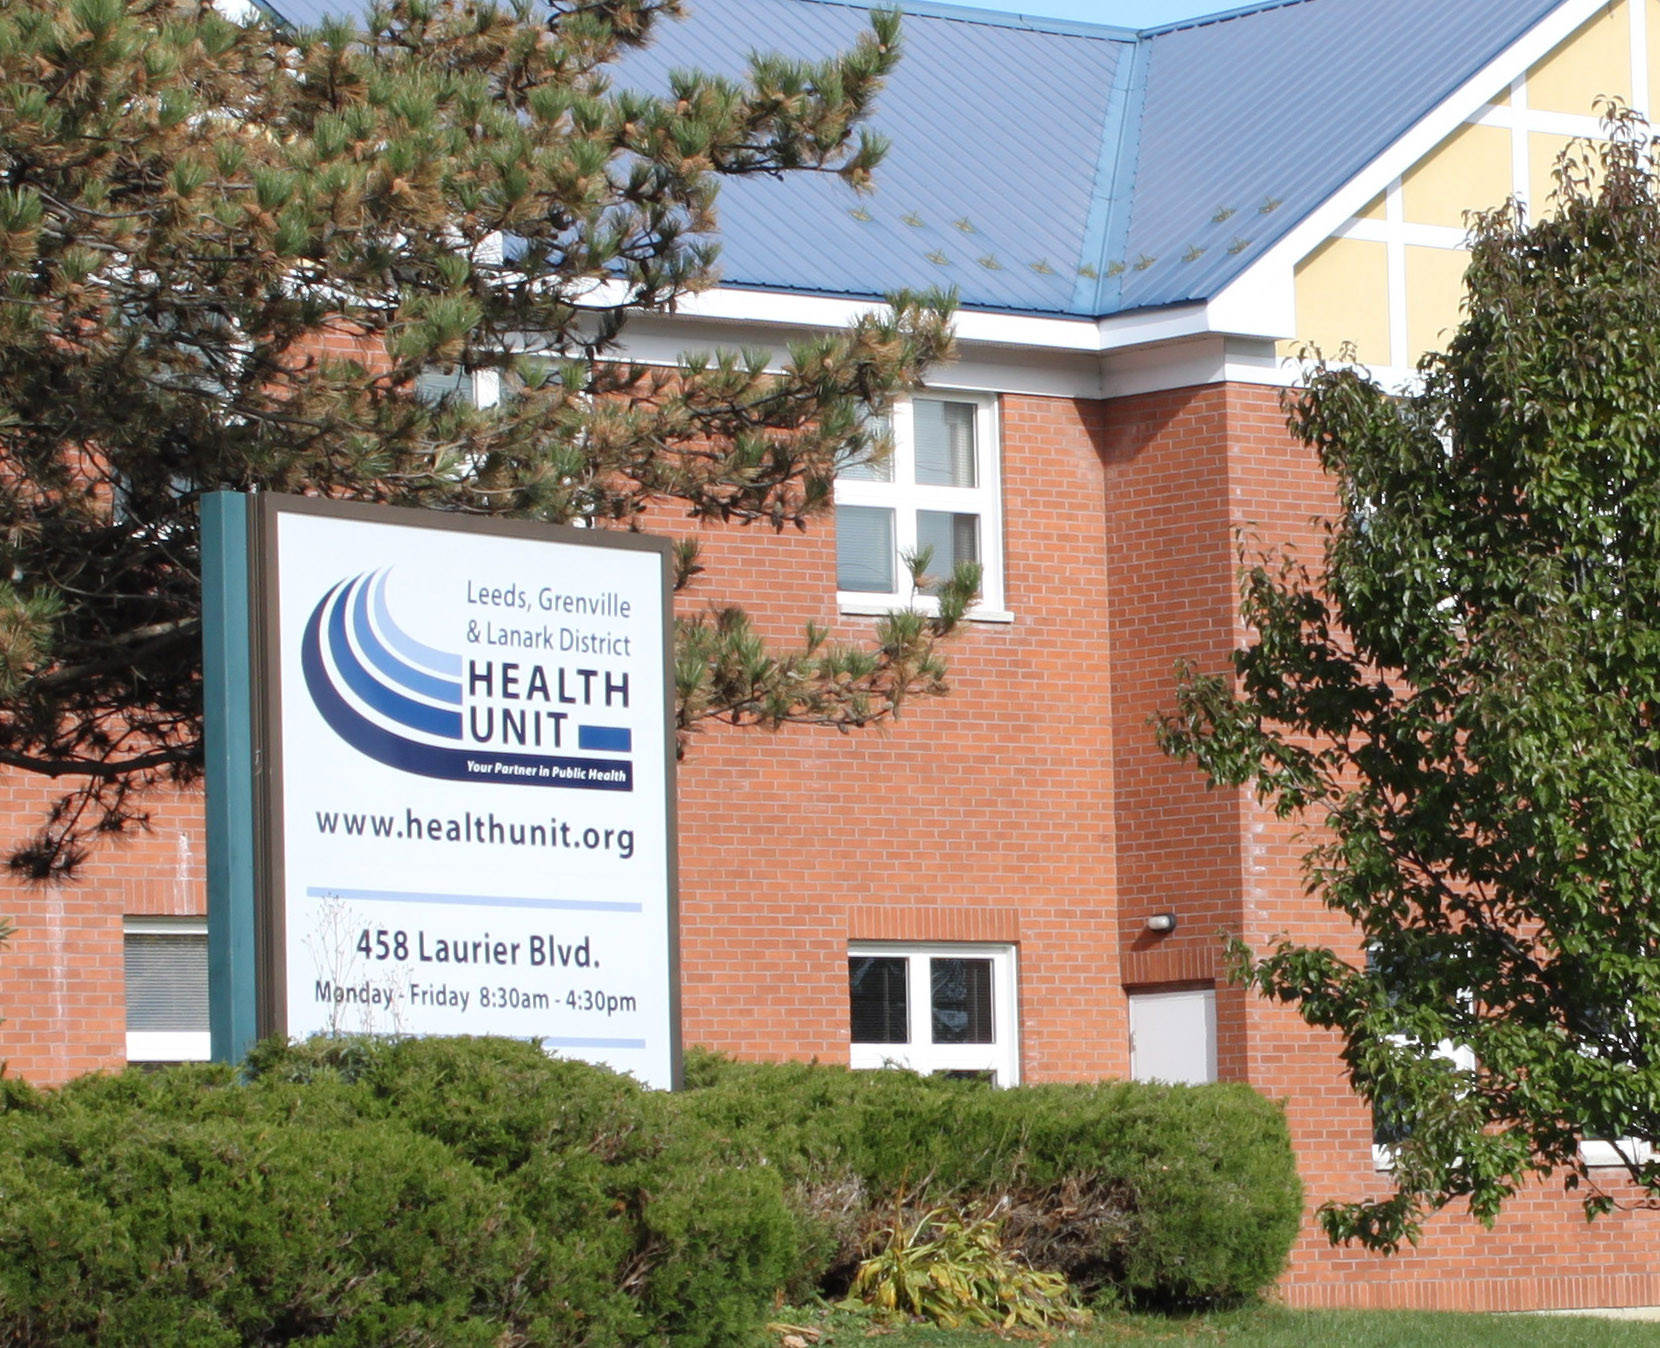 A blue and white sign advertising the Leeds, Grenville and Lanark District Health Unit sits in front of a two-storey red brick building with trees surrounding it